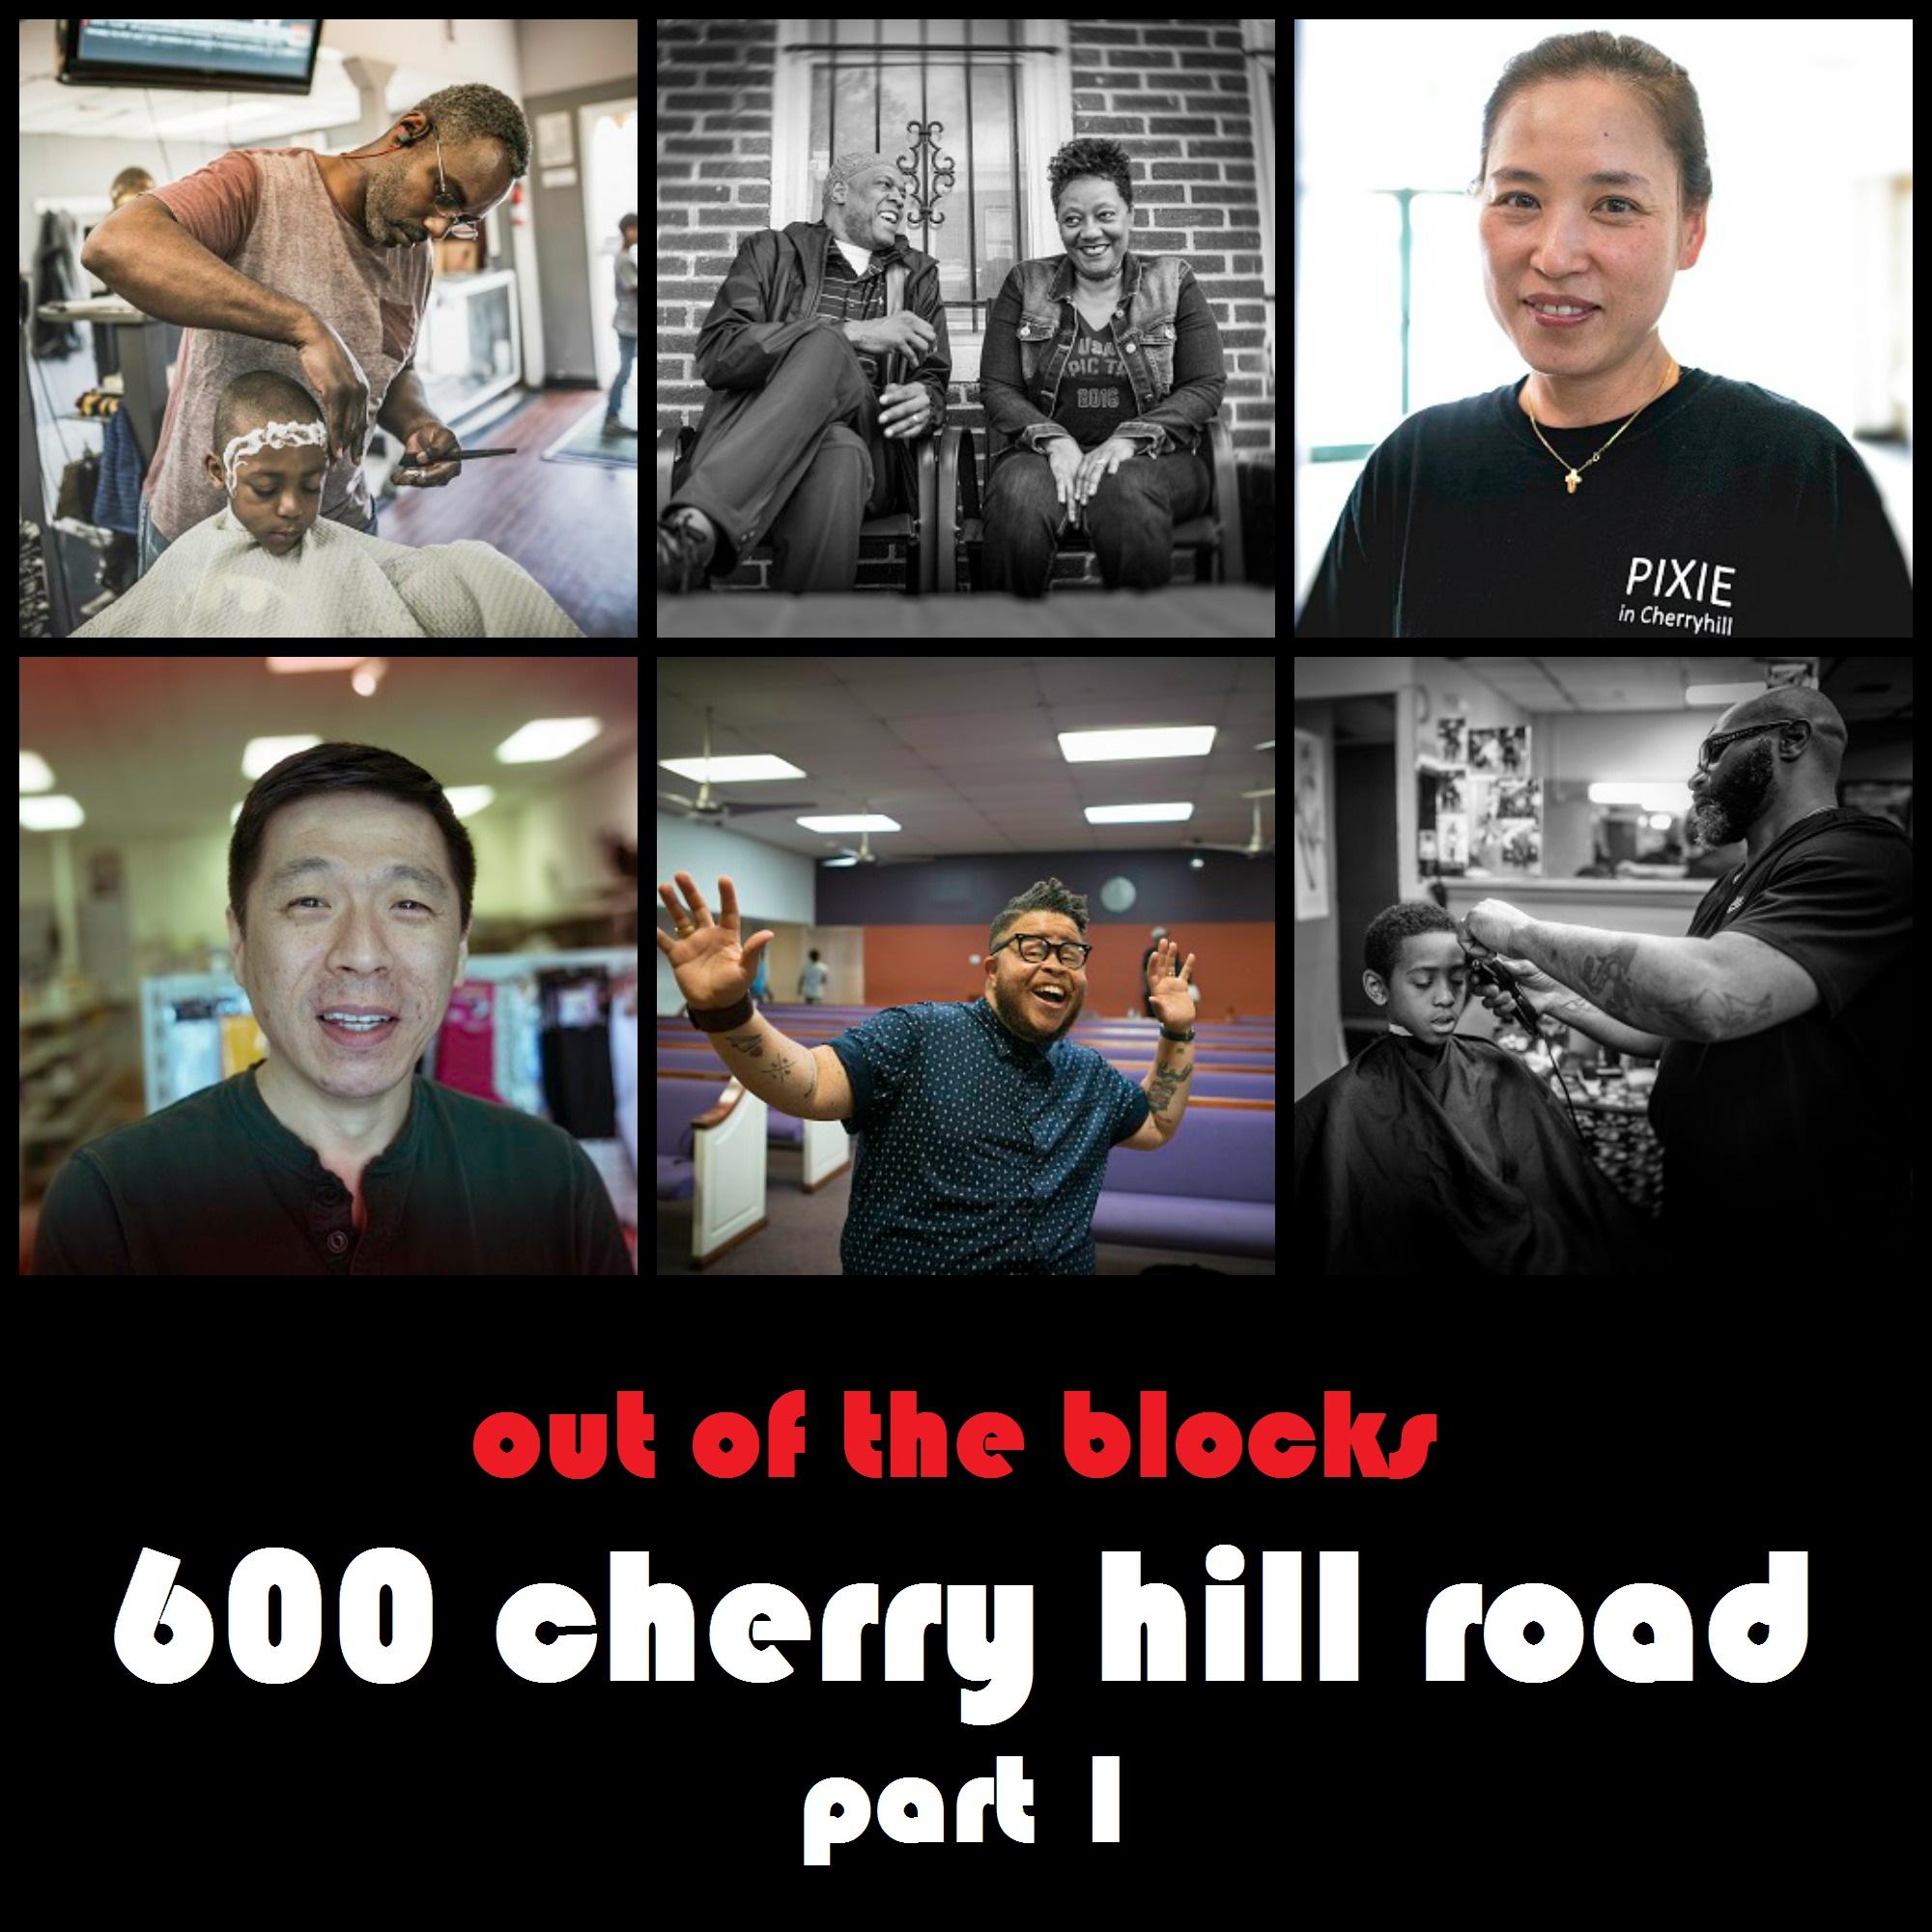 Thumbnail for "600 Cherry Hill Road, Part I".